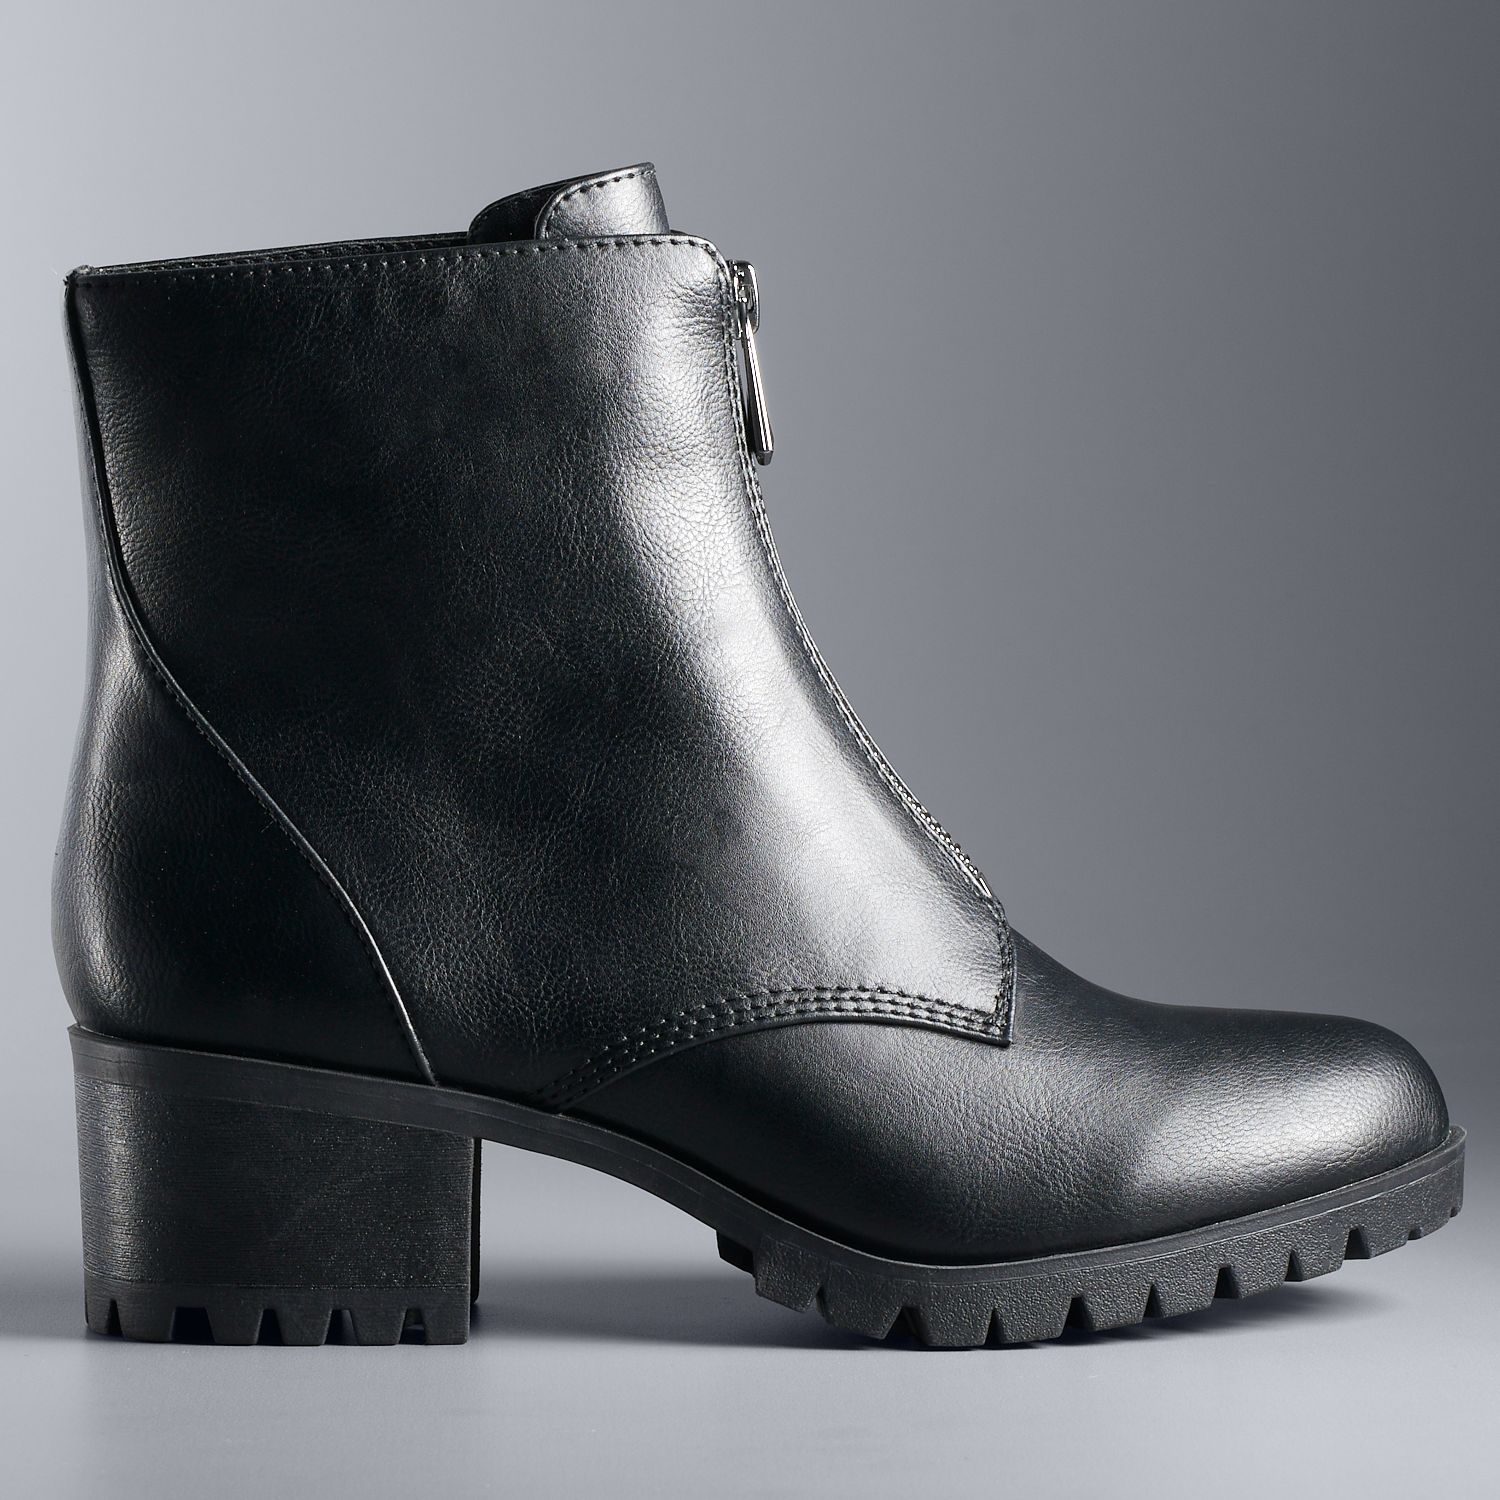 vera wang black ankle boots